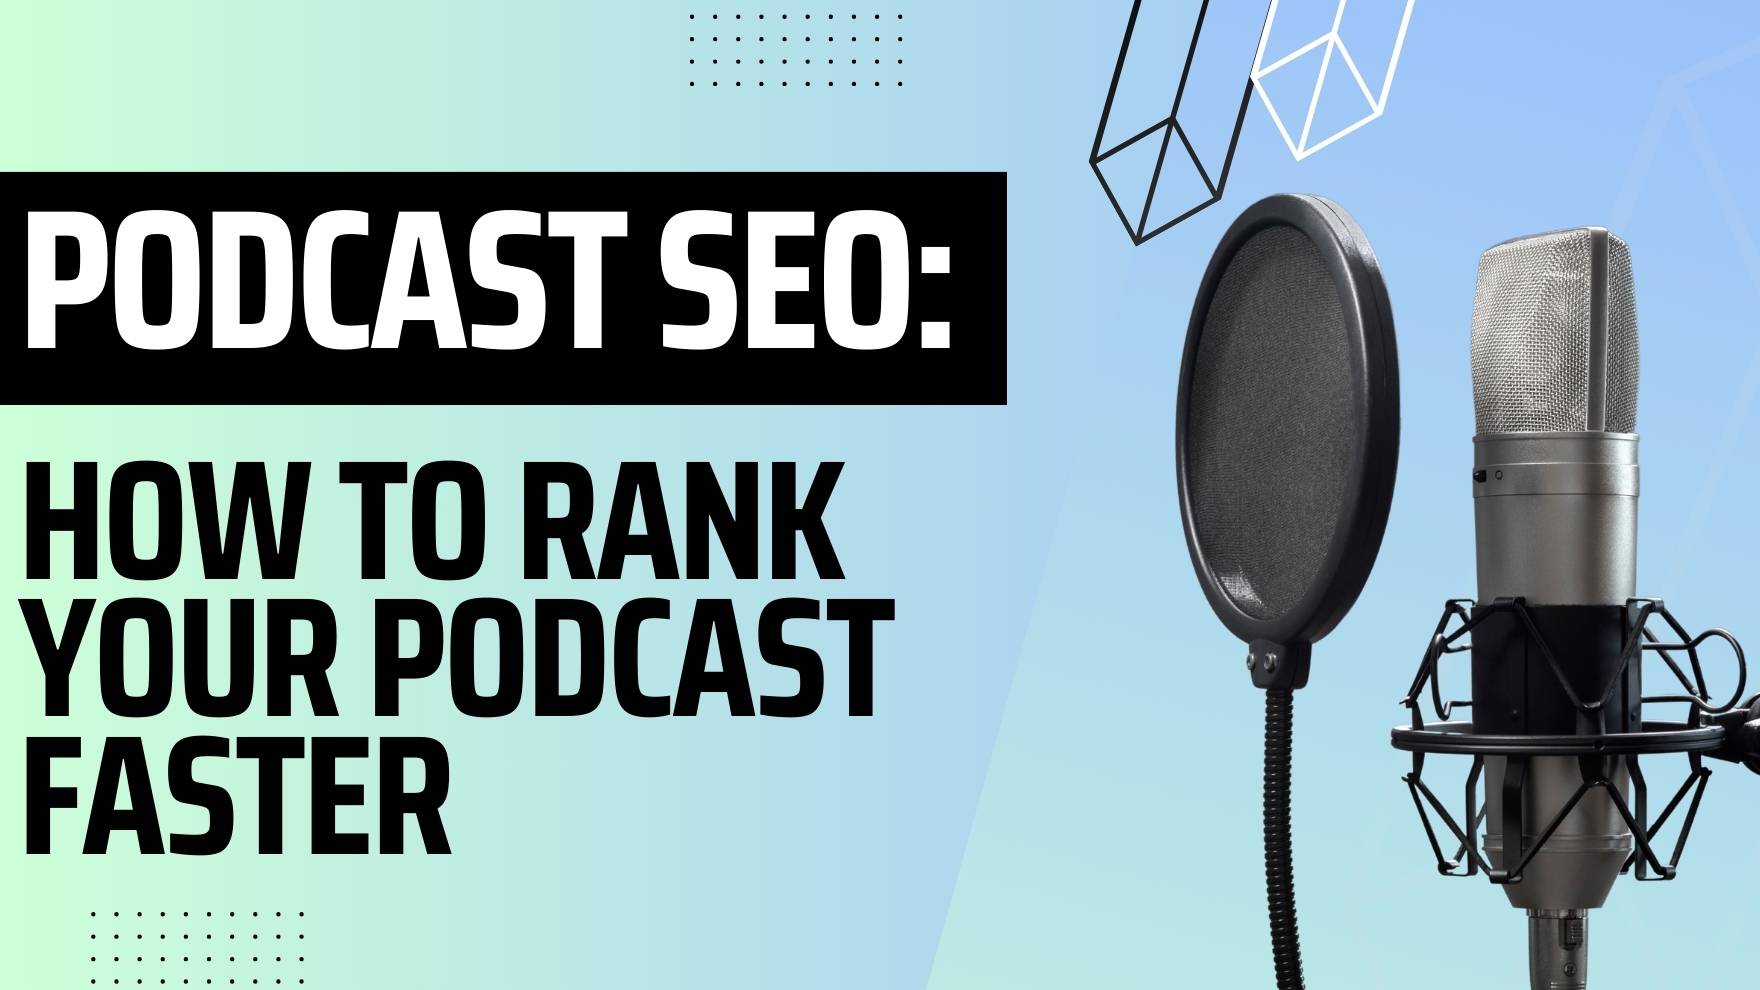 Podcast SEO How To Rank Your Podcast Faster